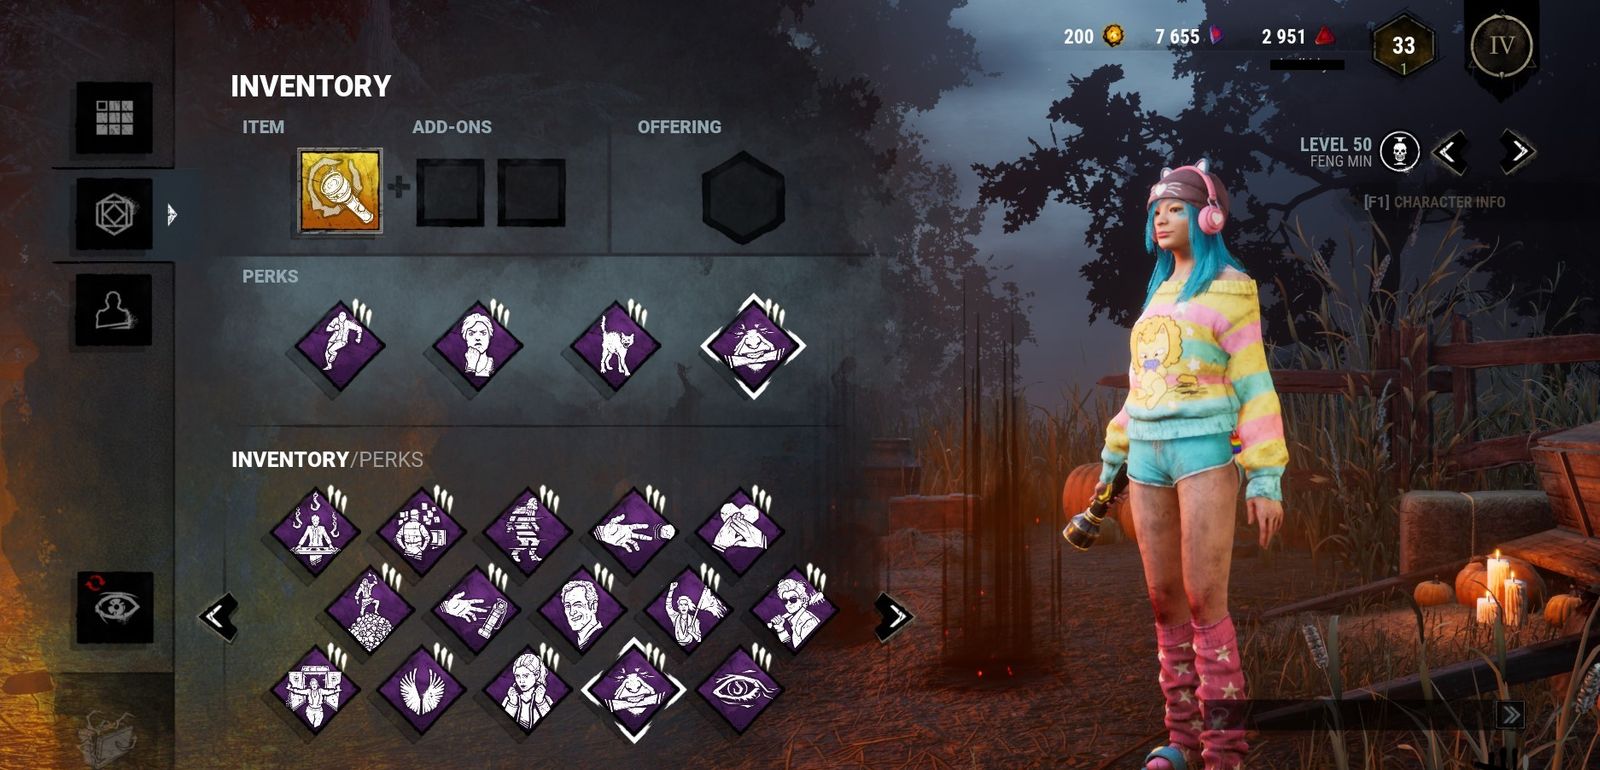 A survivor loadout in Dead by Daylight for those who like a chase and making the most of vaults during them.